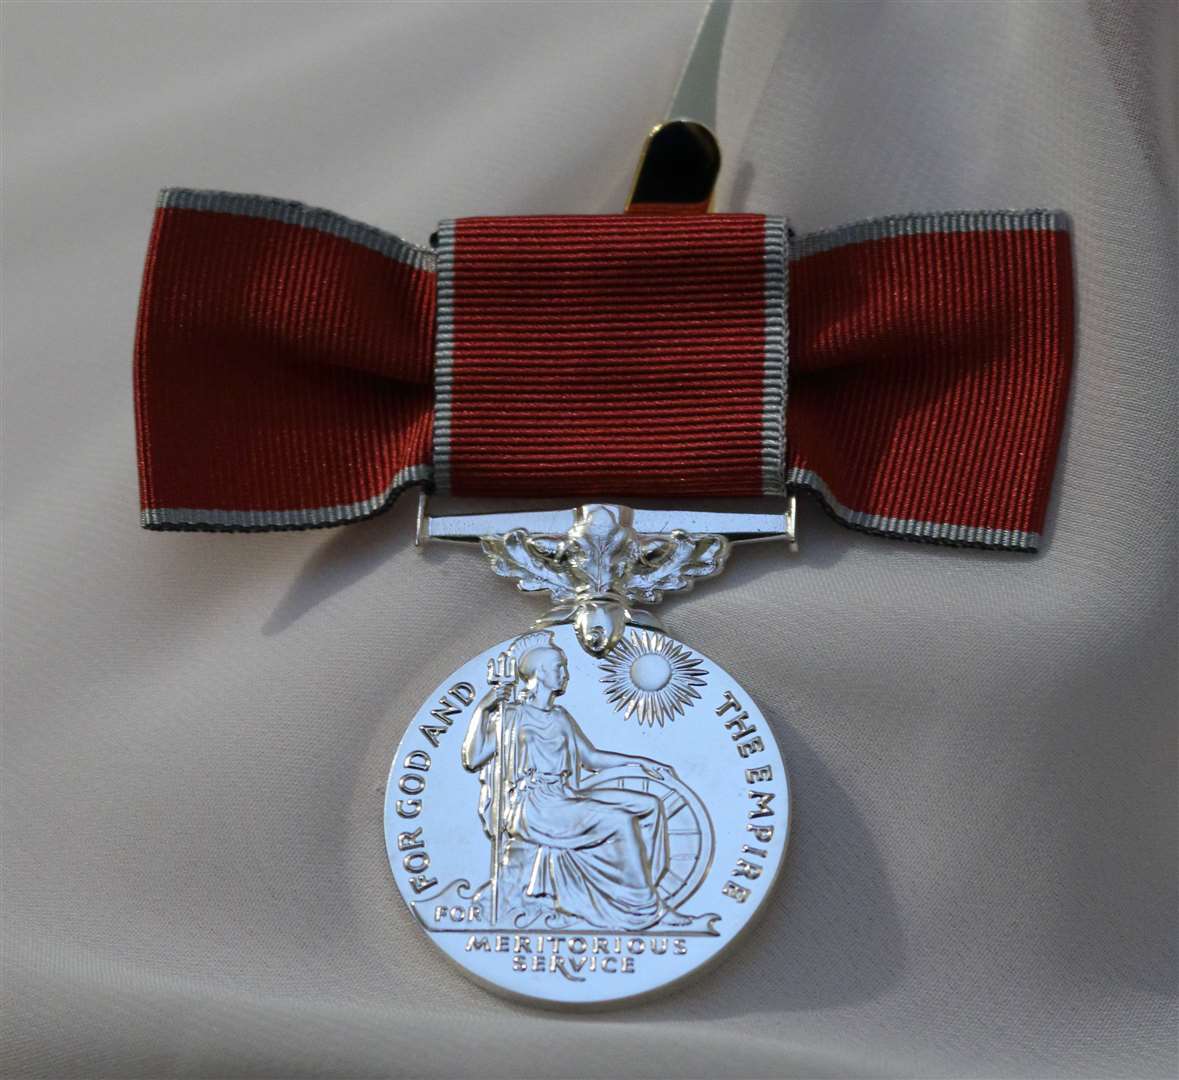 The British Empire Medal was presented to Morag Lightning.